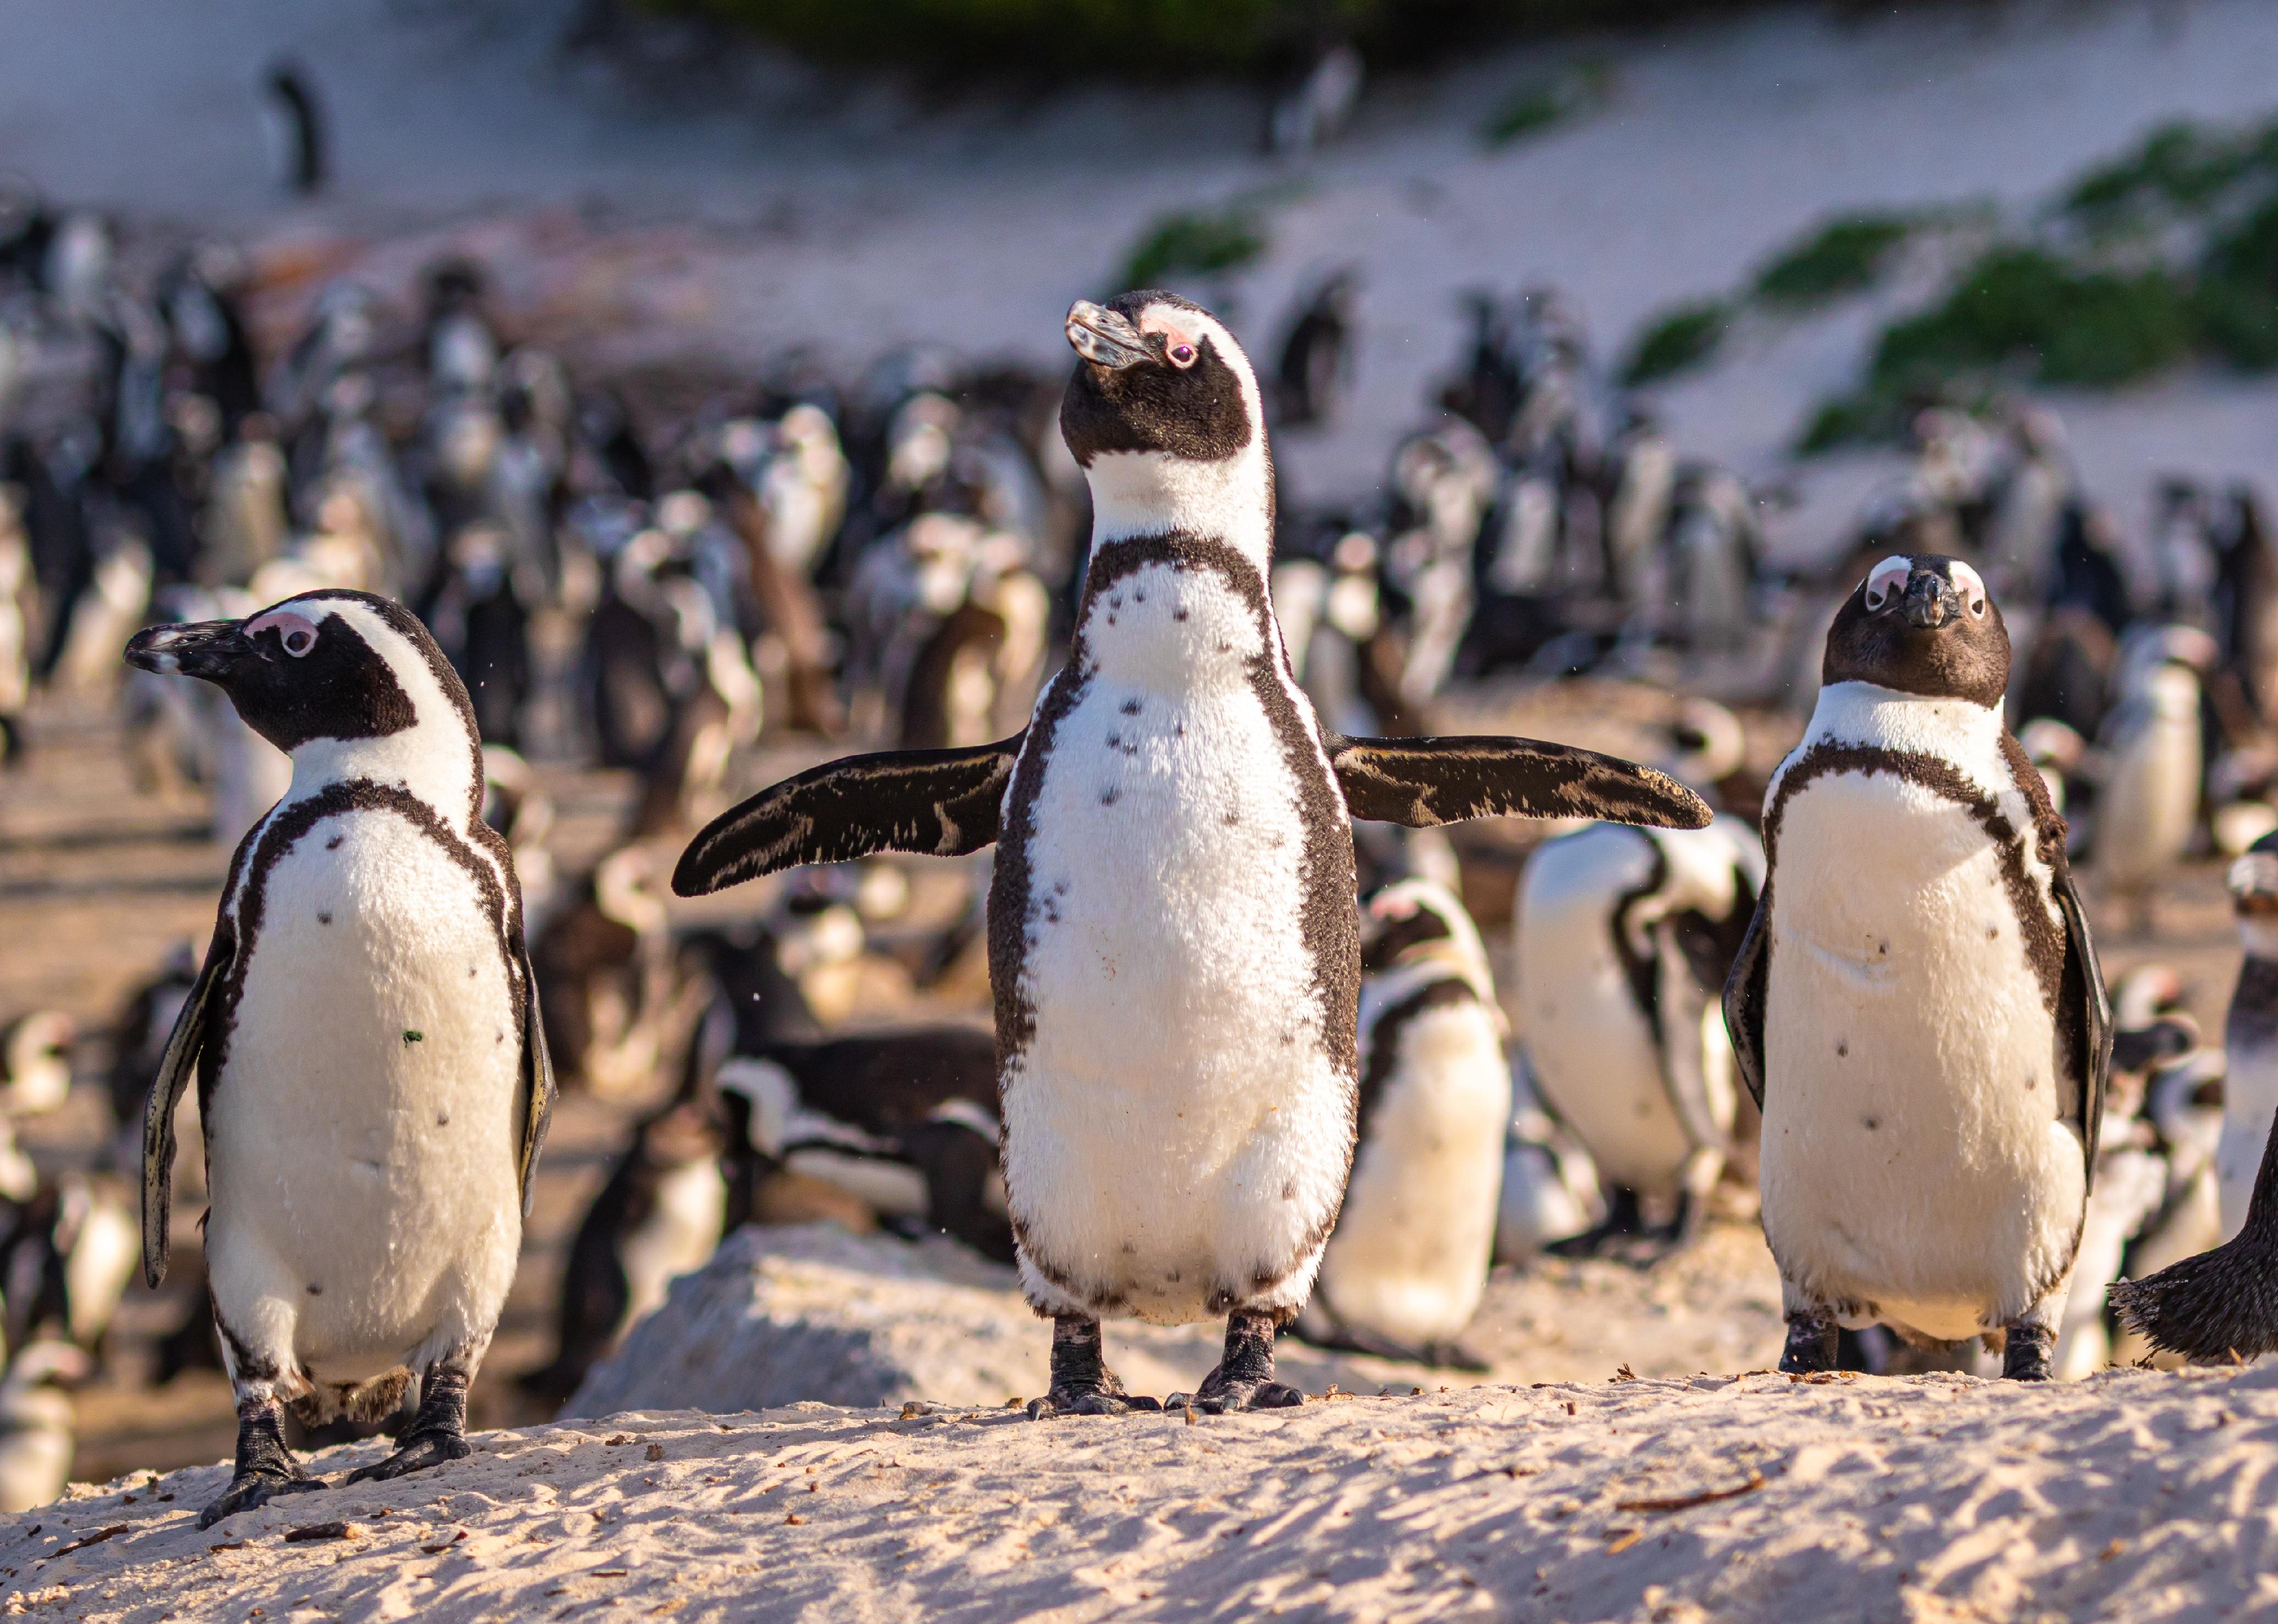 Humboldt Penguins on a beach in South Africa.